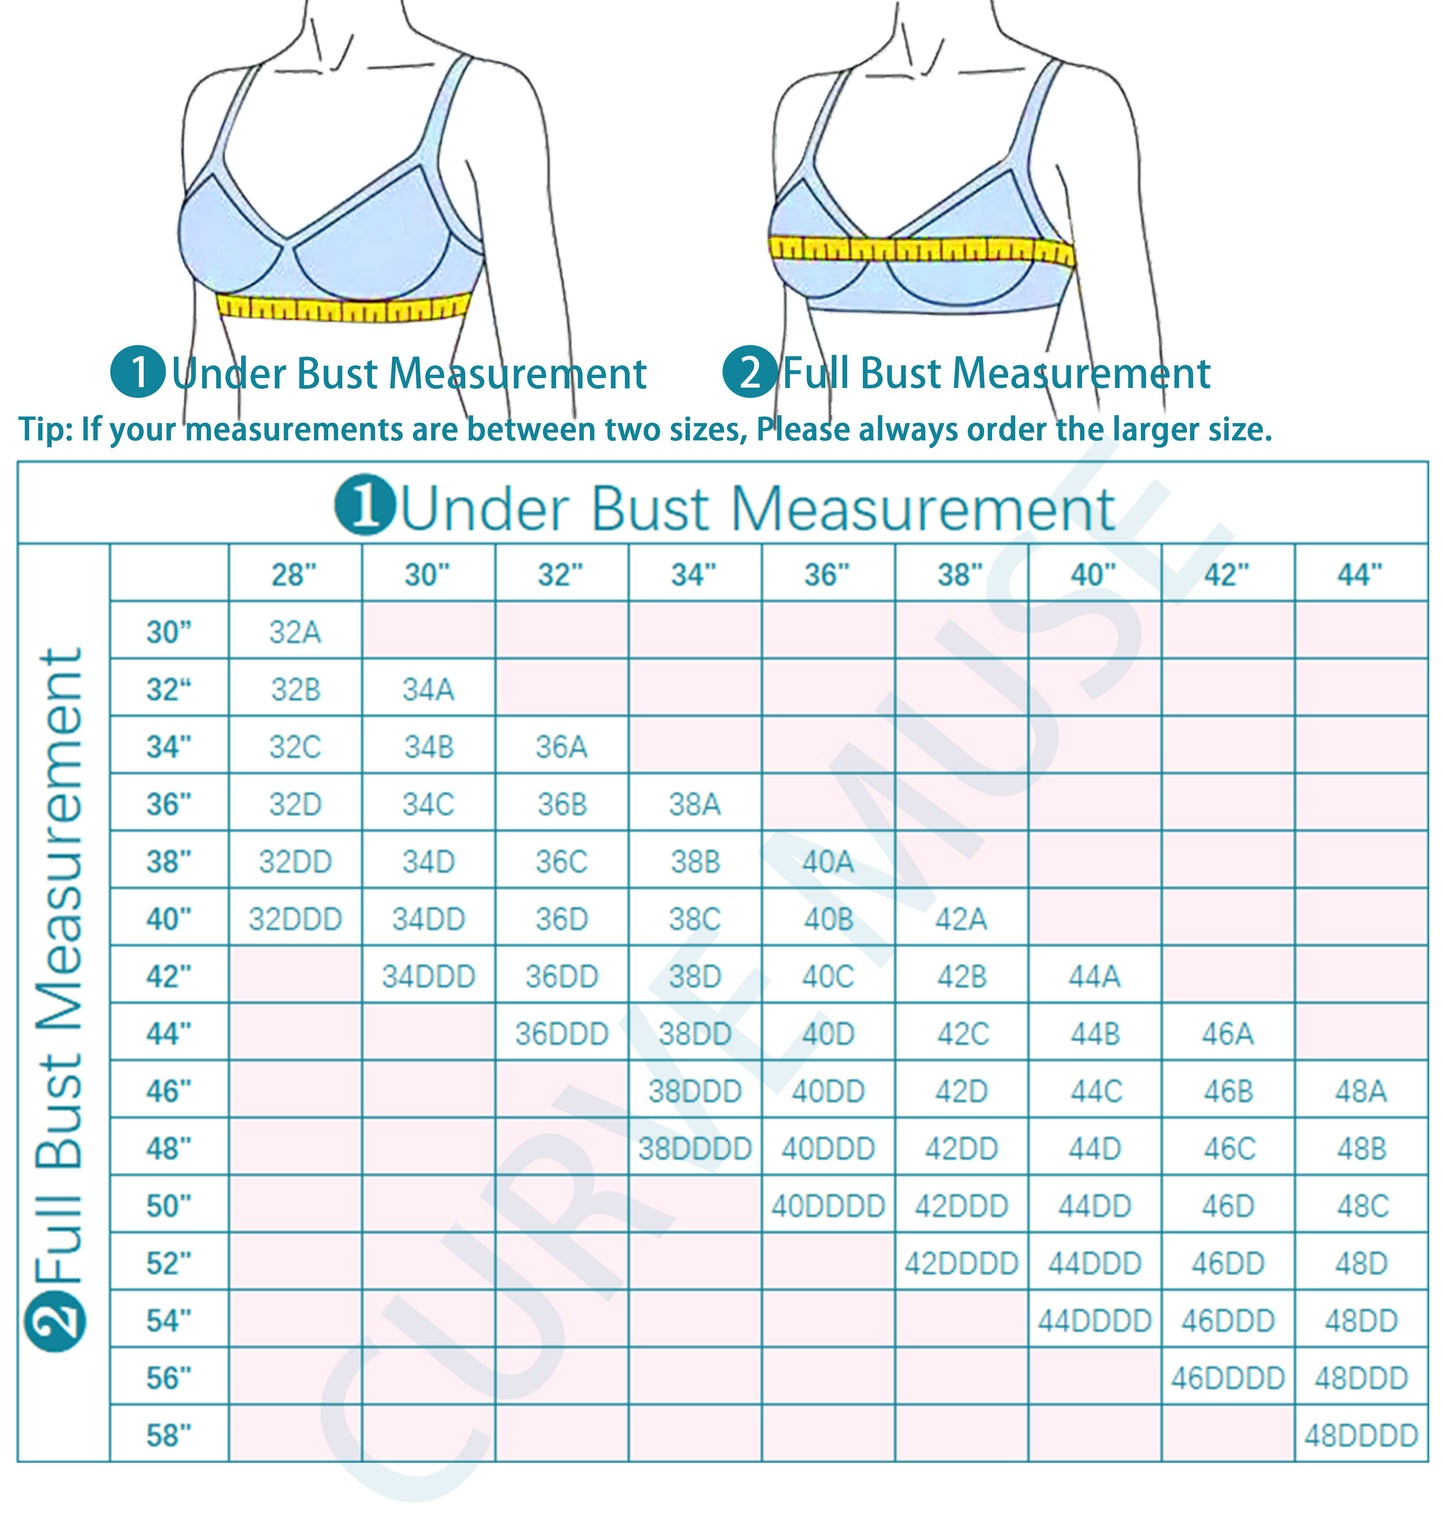 Women's Plus Size Perfect Shape Add 1 Cup Push Up Underwire Tshirt Bra